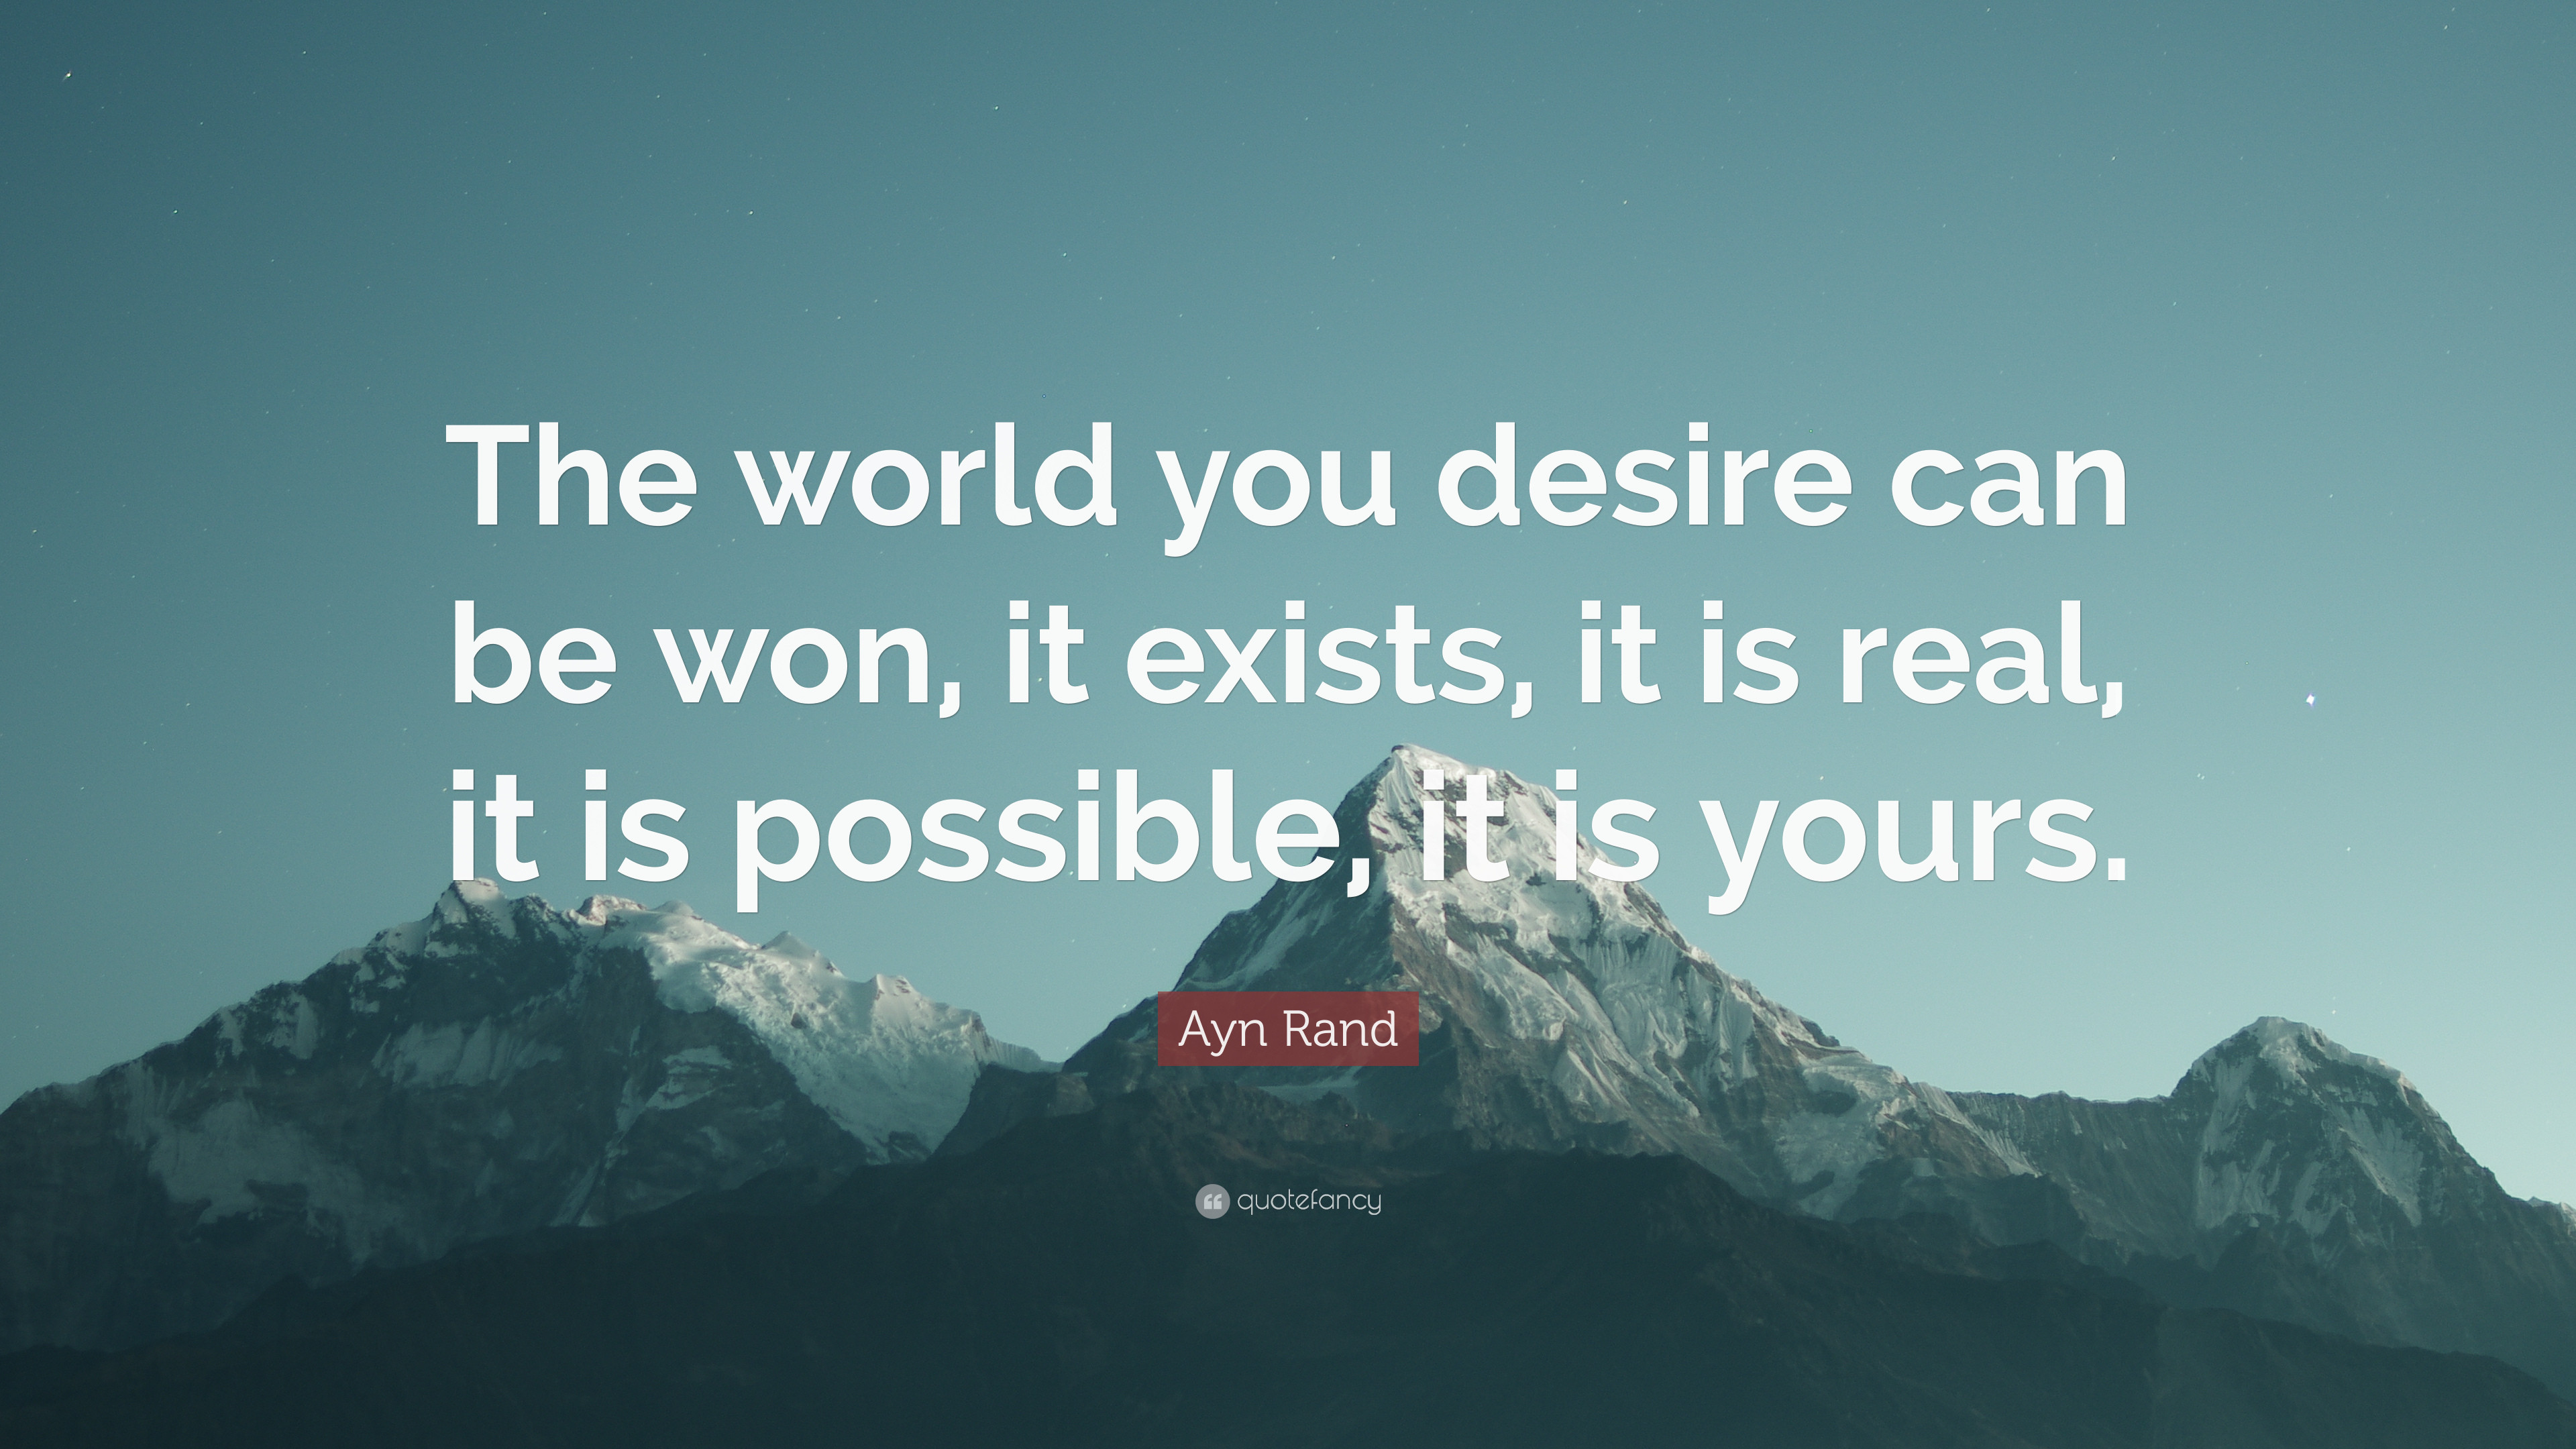 3840x2160 Ayn Rand Quote: “The world you desire can be won, it exists,